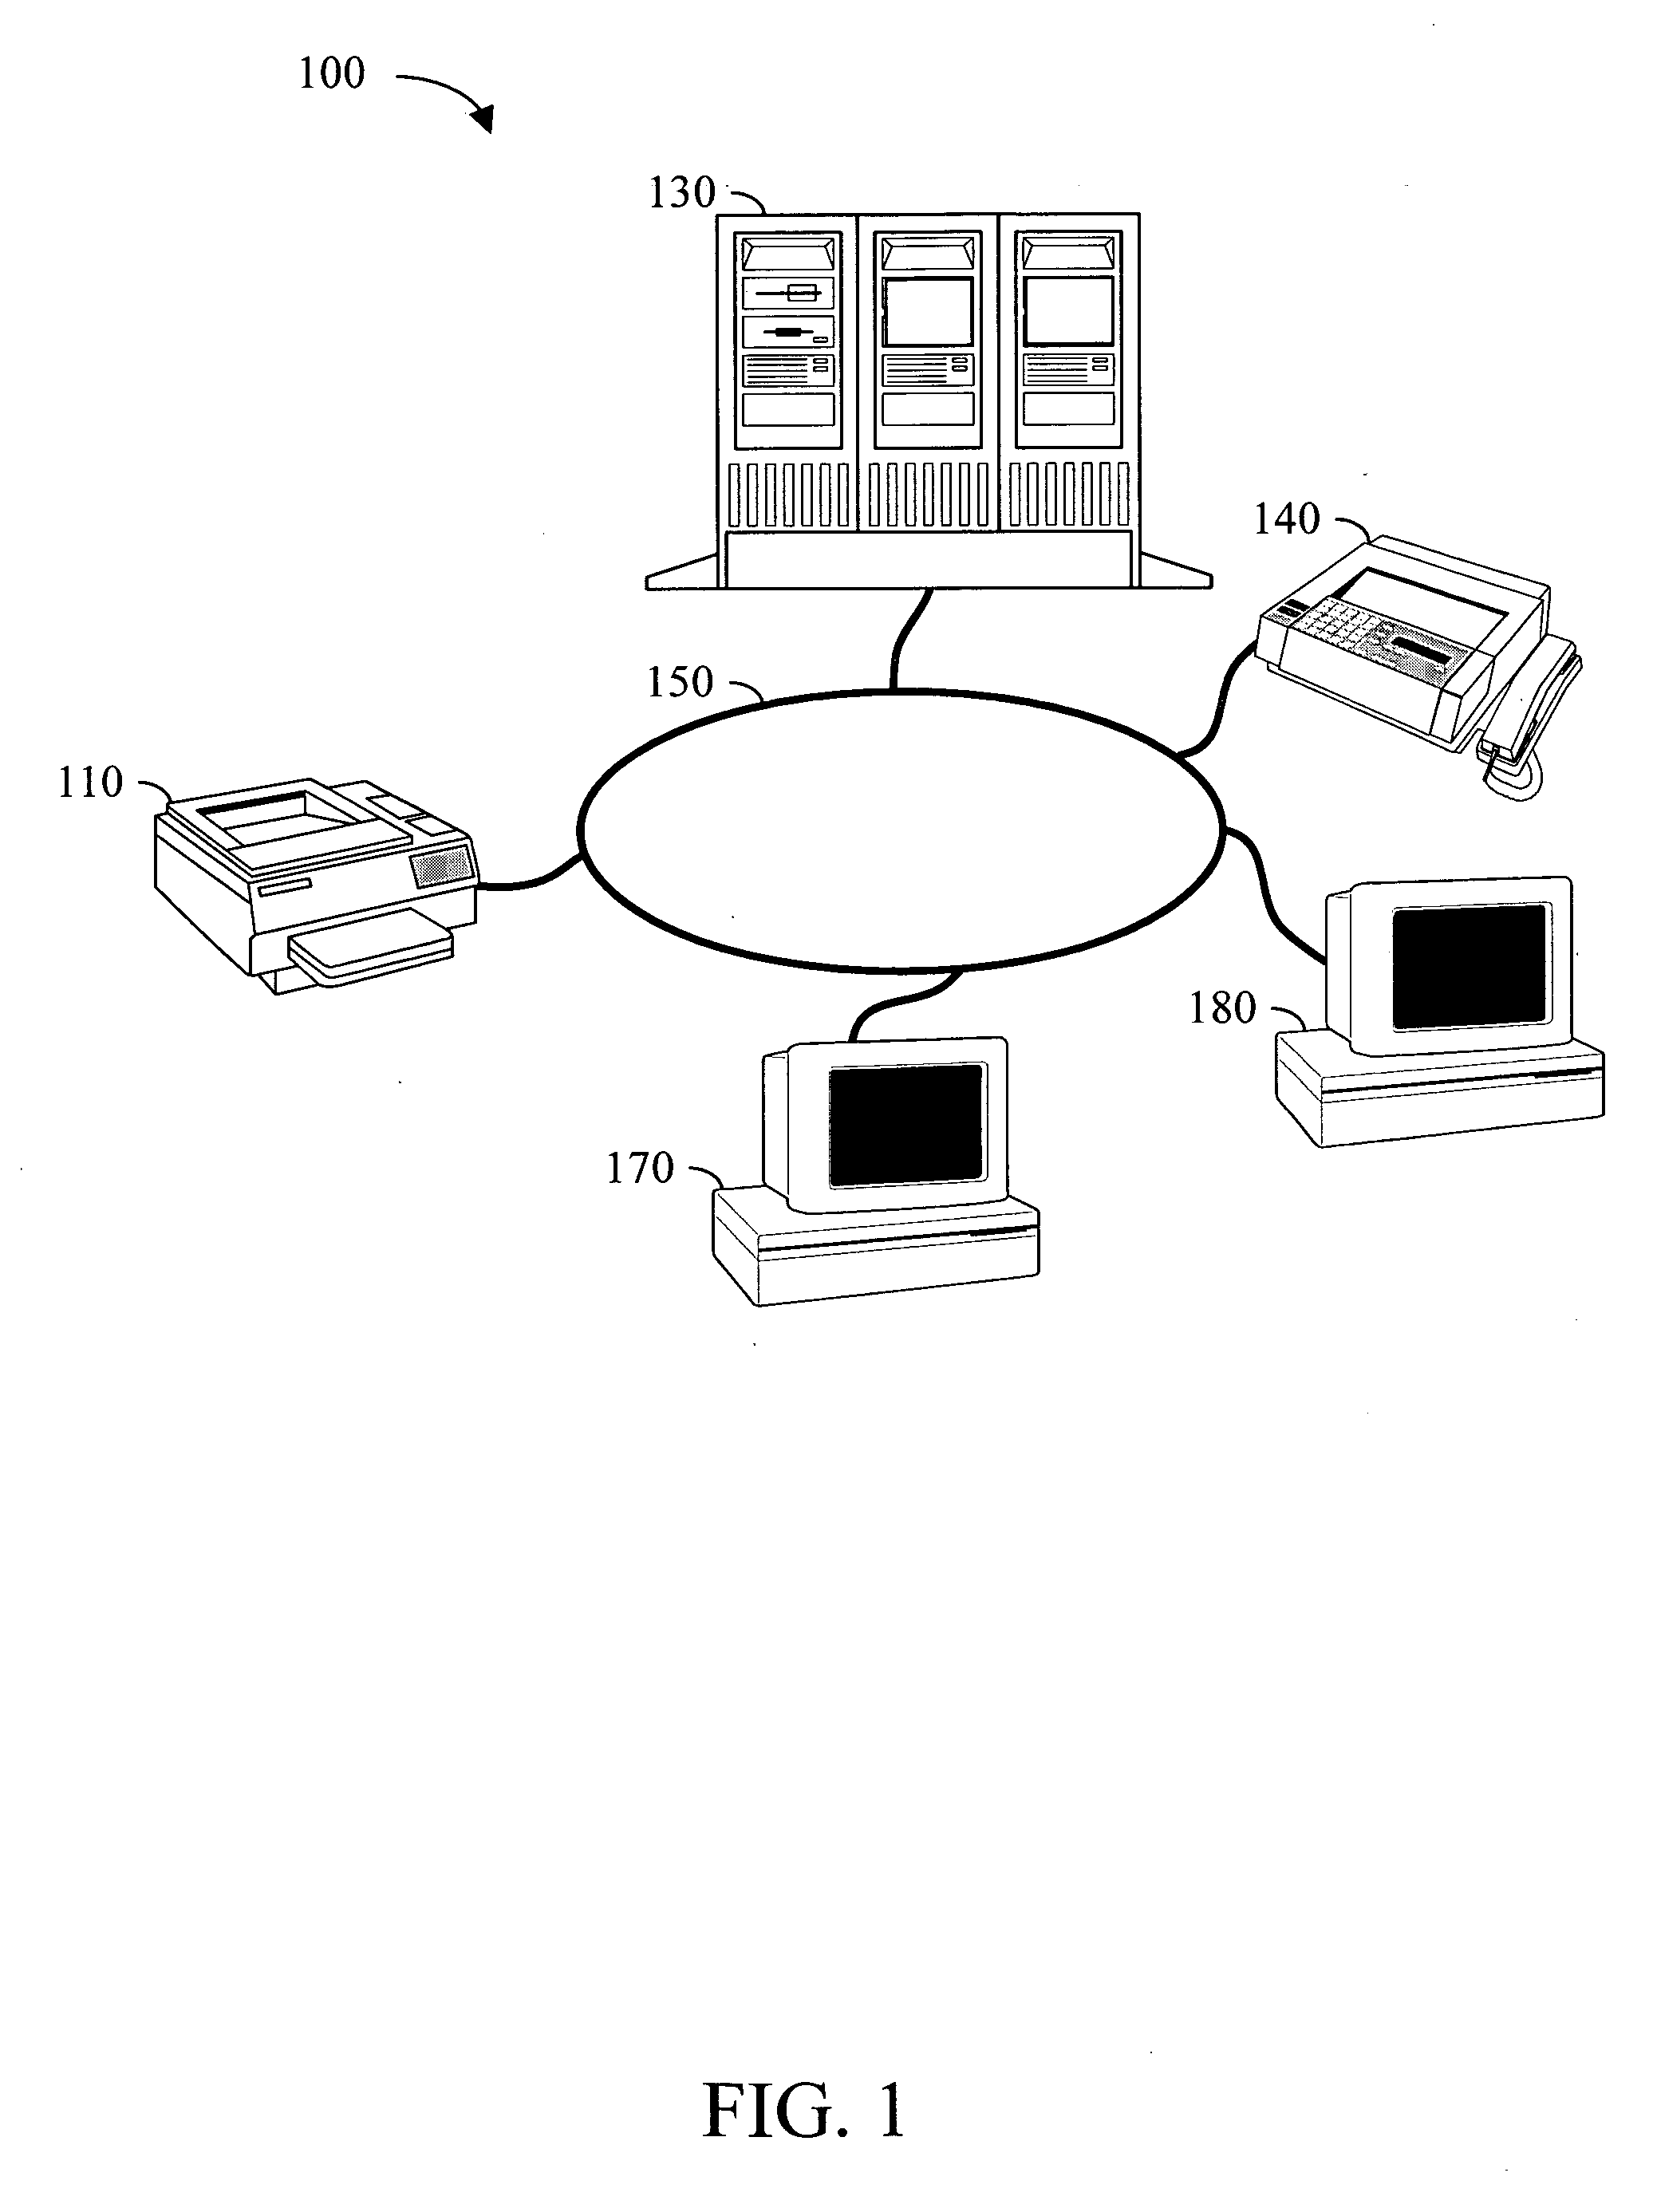 Apparatus and method for computerized information management